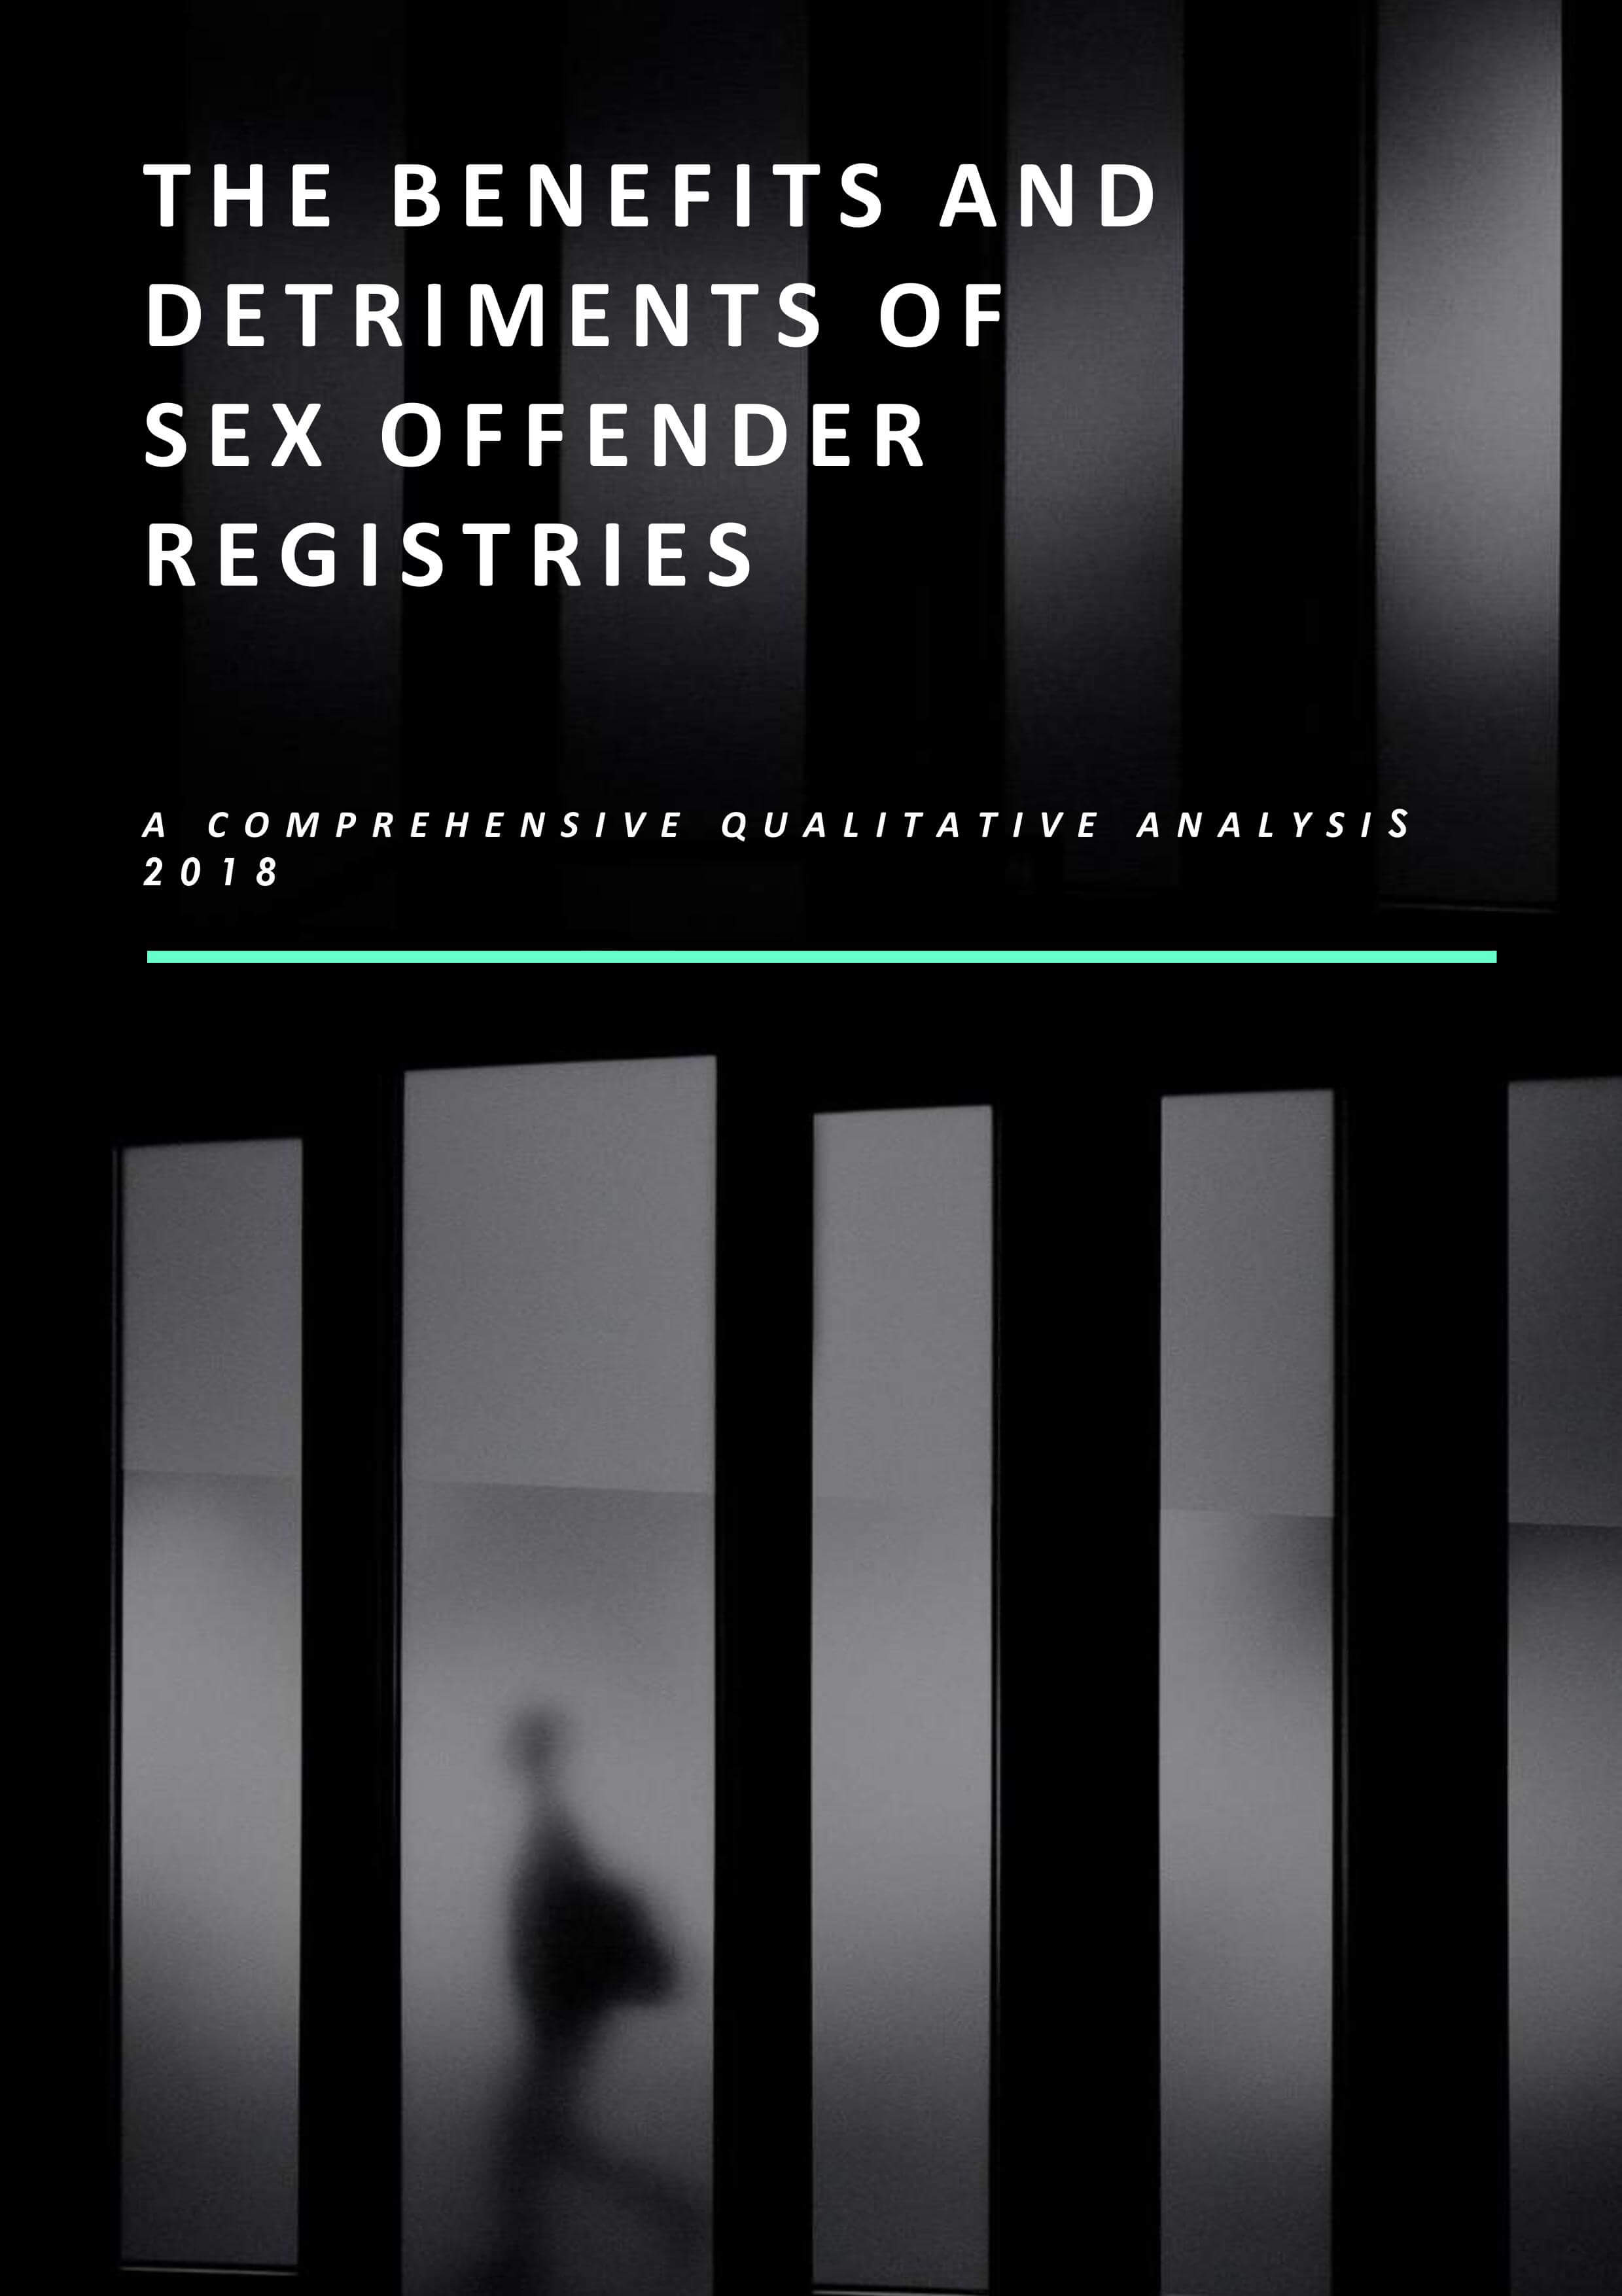 The Benefits and Detriments of Sex Offender Registries, A Comprehensive Qualitative Analysis 2018